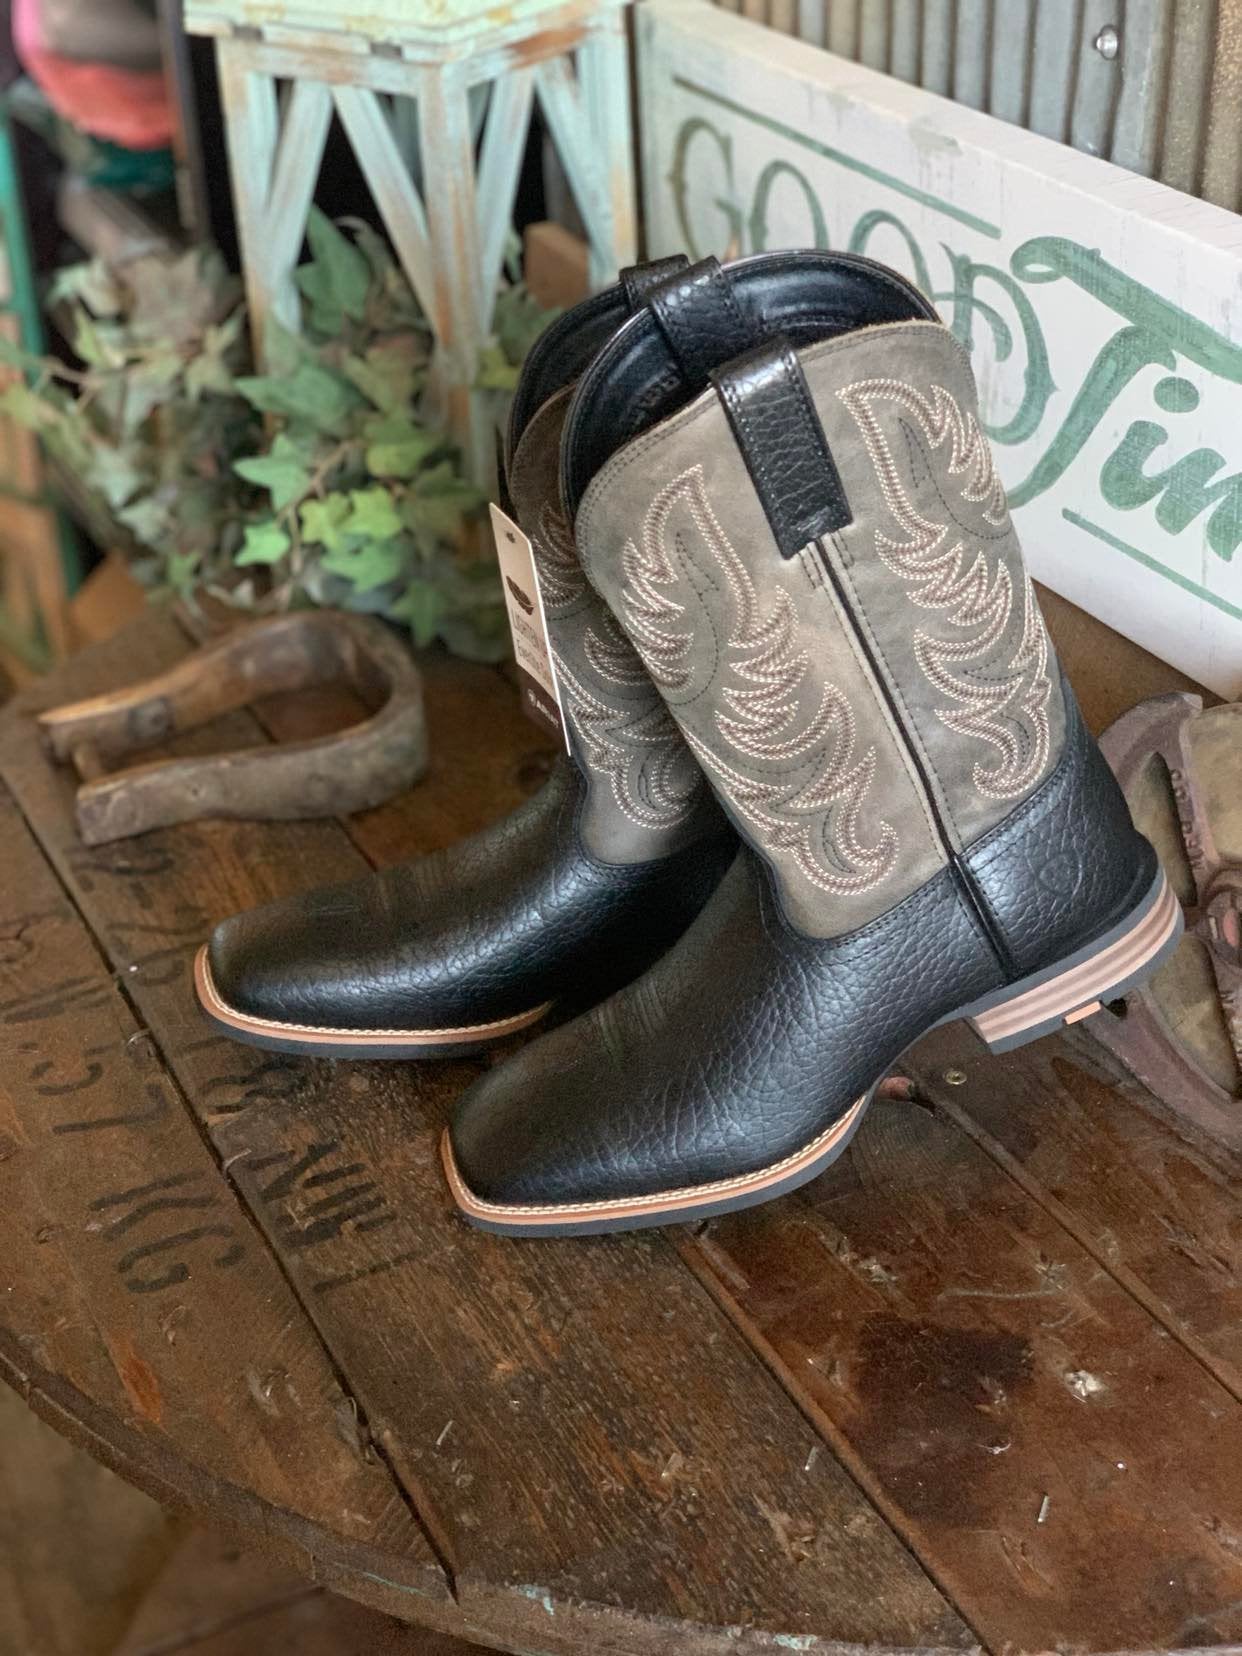 Mens Ariat Everlite Countdown Square Toe Boots in Black / Slate Grey-Men's Boots-Ariat-Lucky J Boots & More, Women's, Men's, & Kids Western Store Located in Carthage, MO